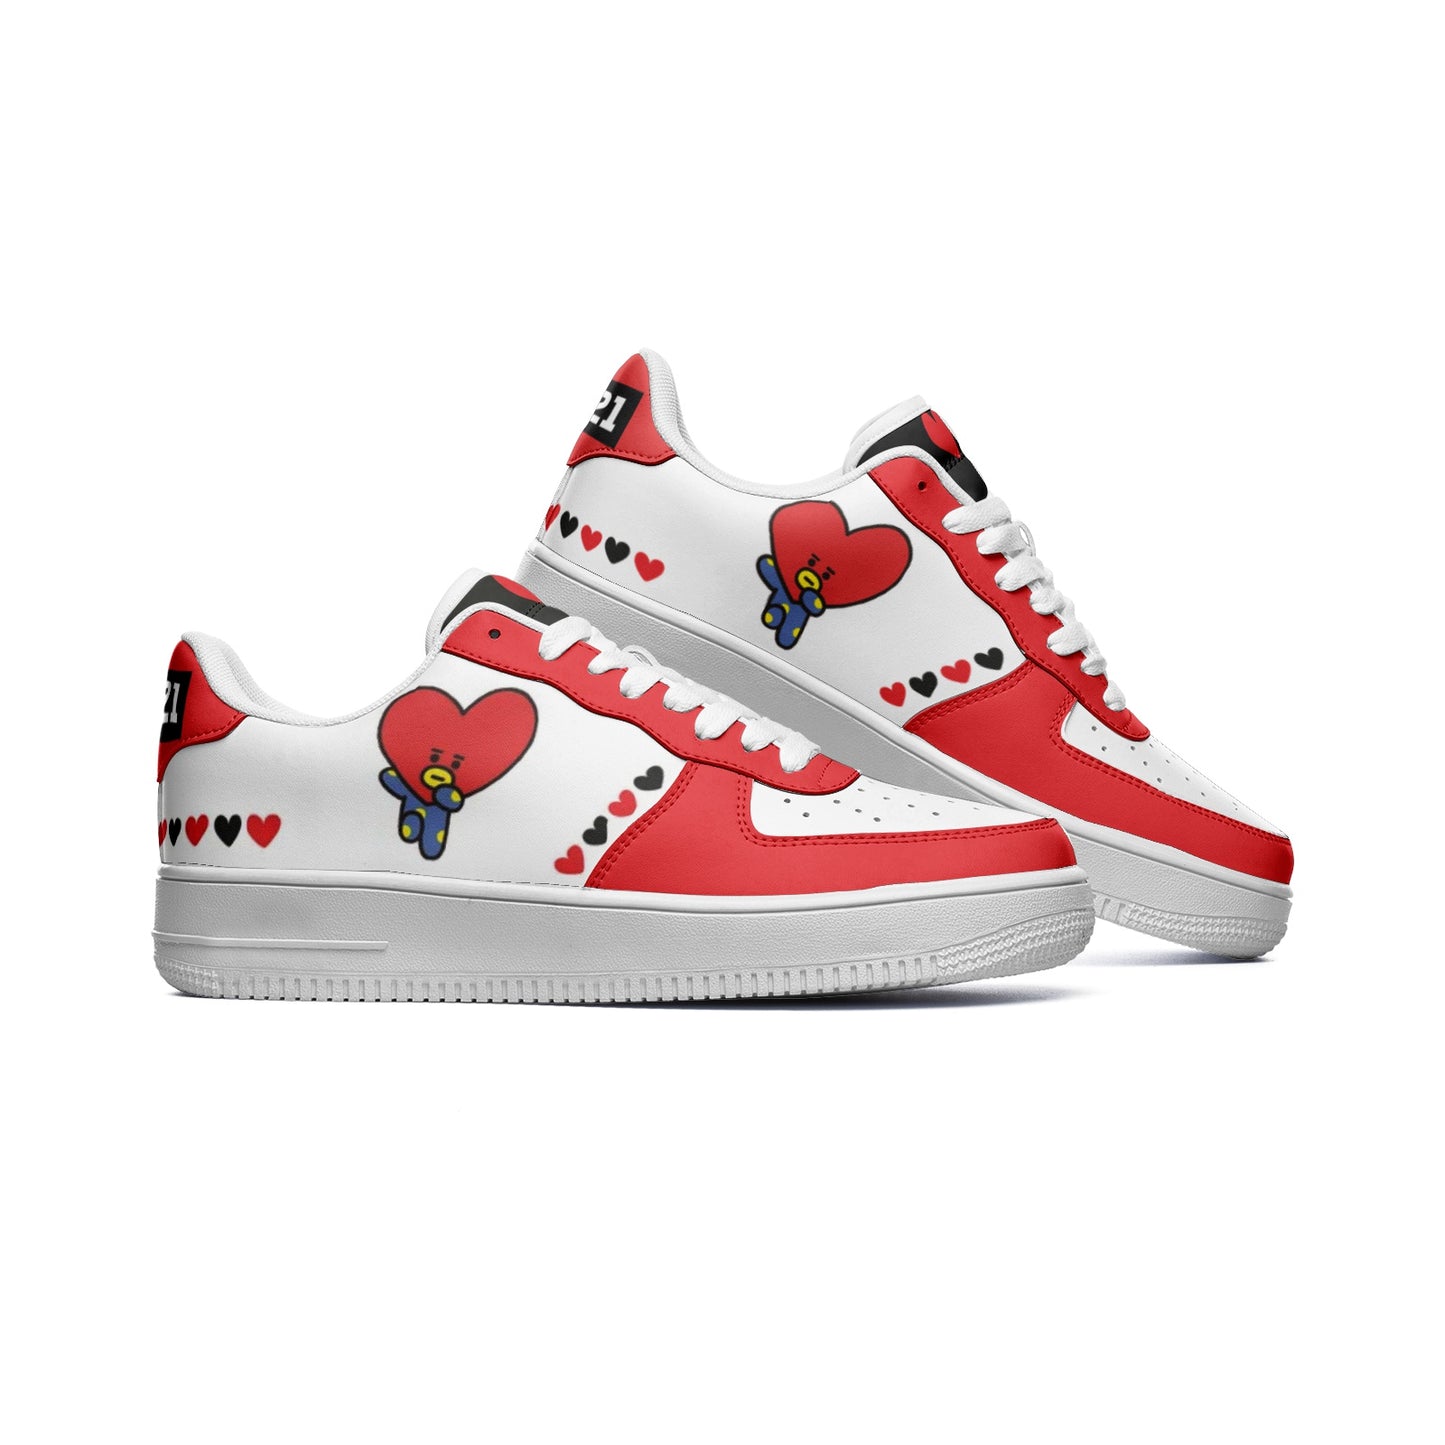 BT21 Tata Unisex Low Top Leather Sneakers - Red - SD-style-shop